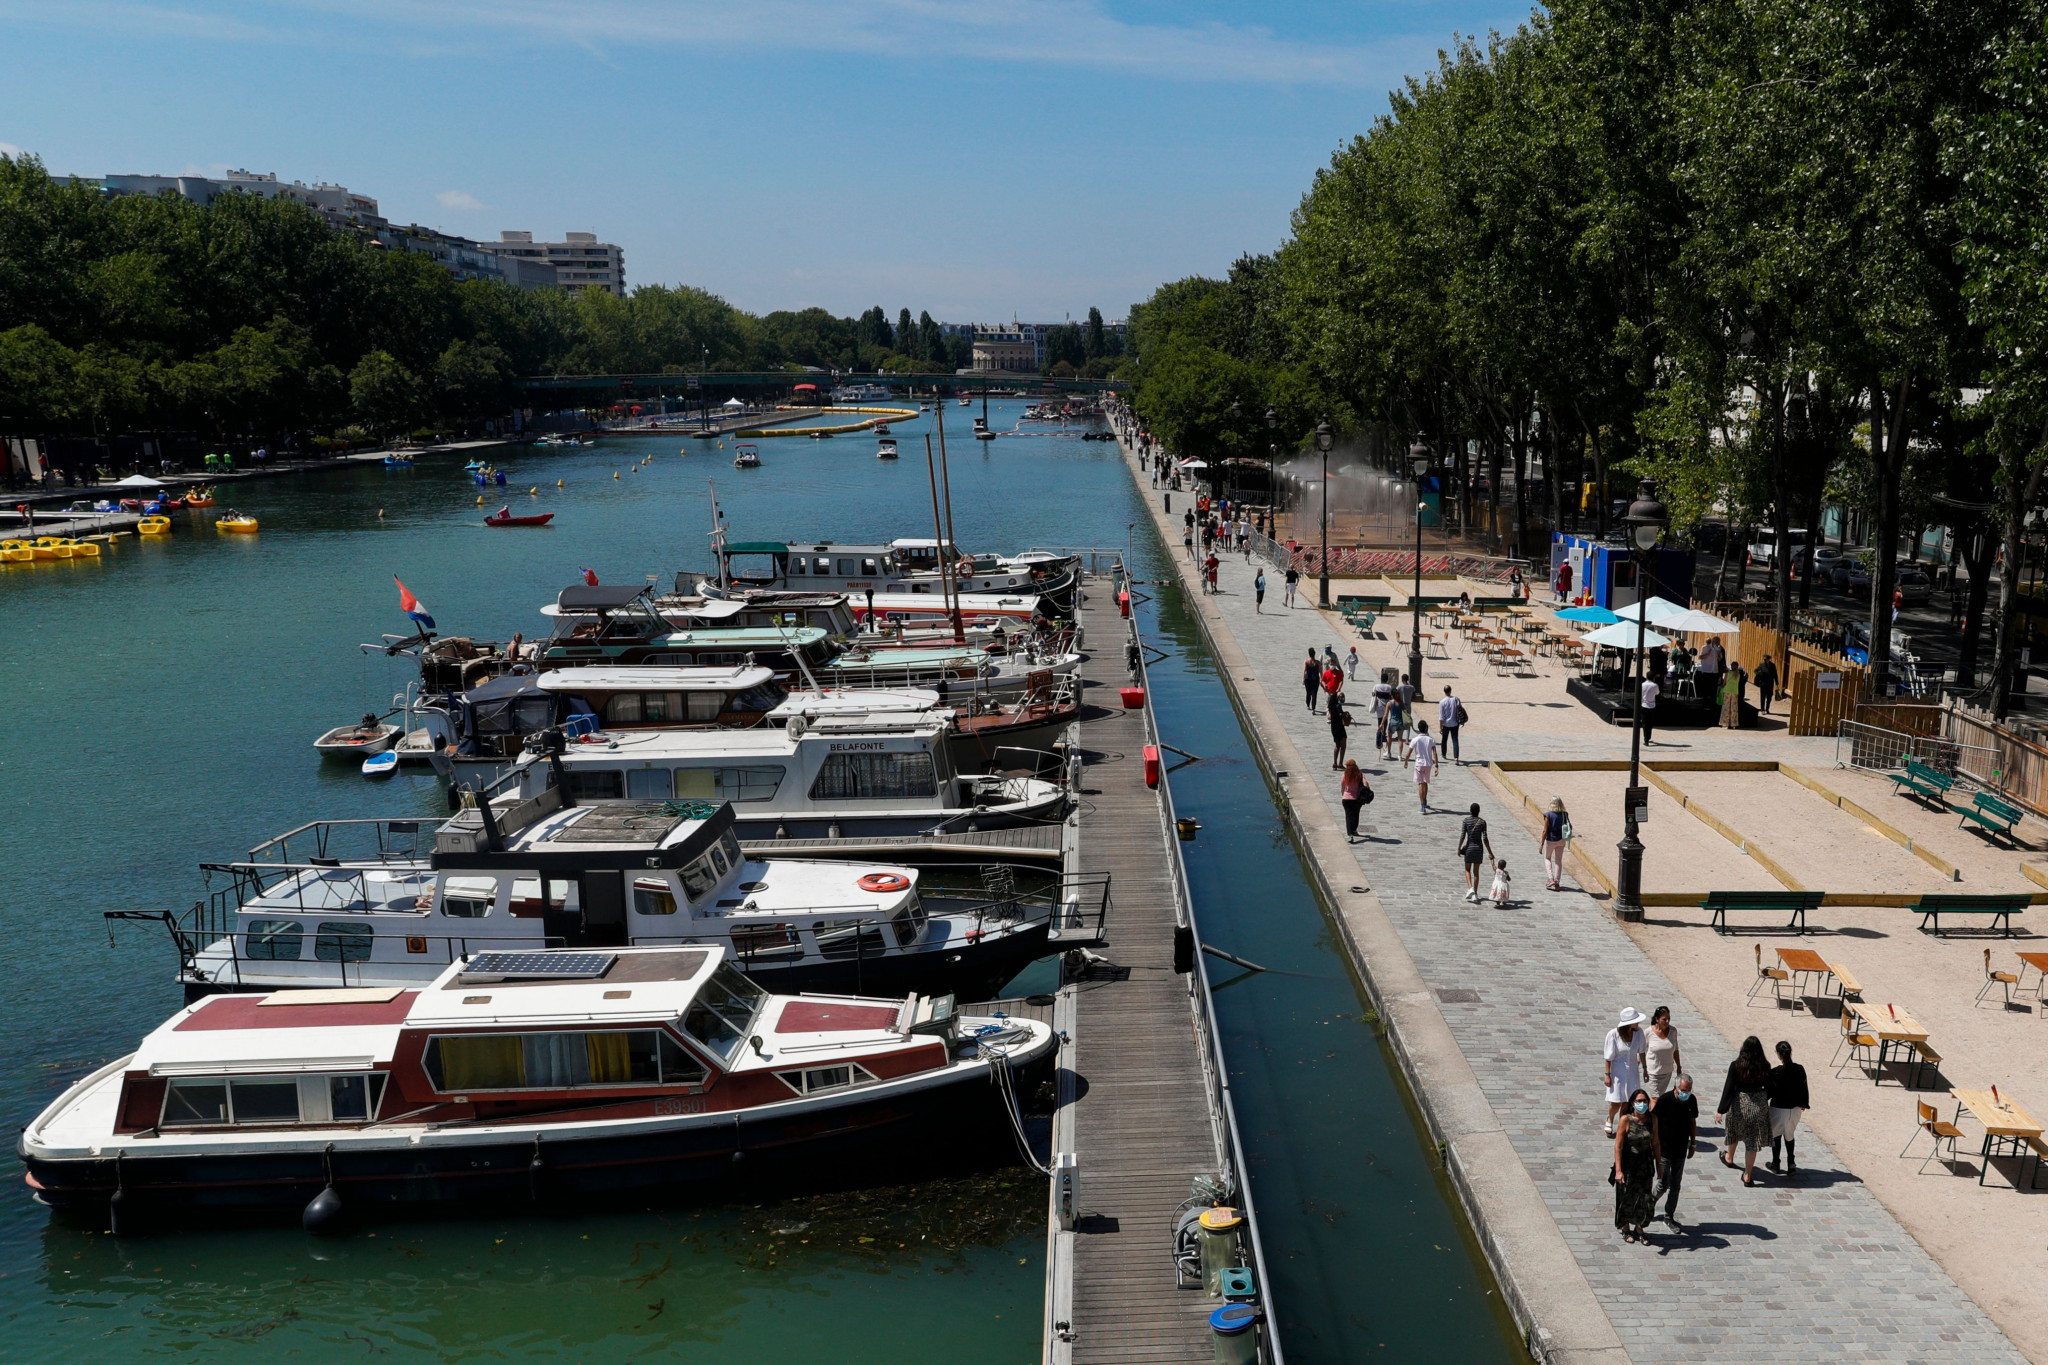 The River Seine's water quality has been described as "excellent" ©Getty Images